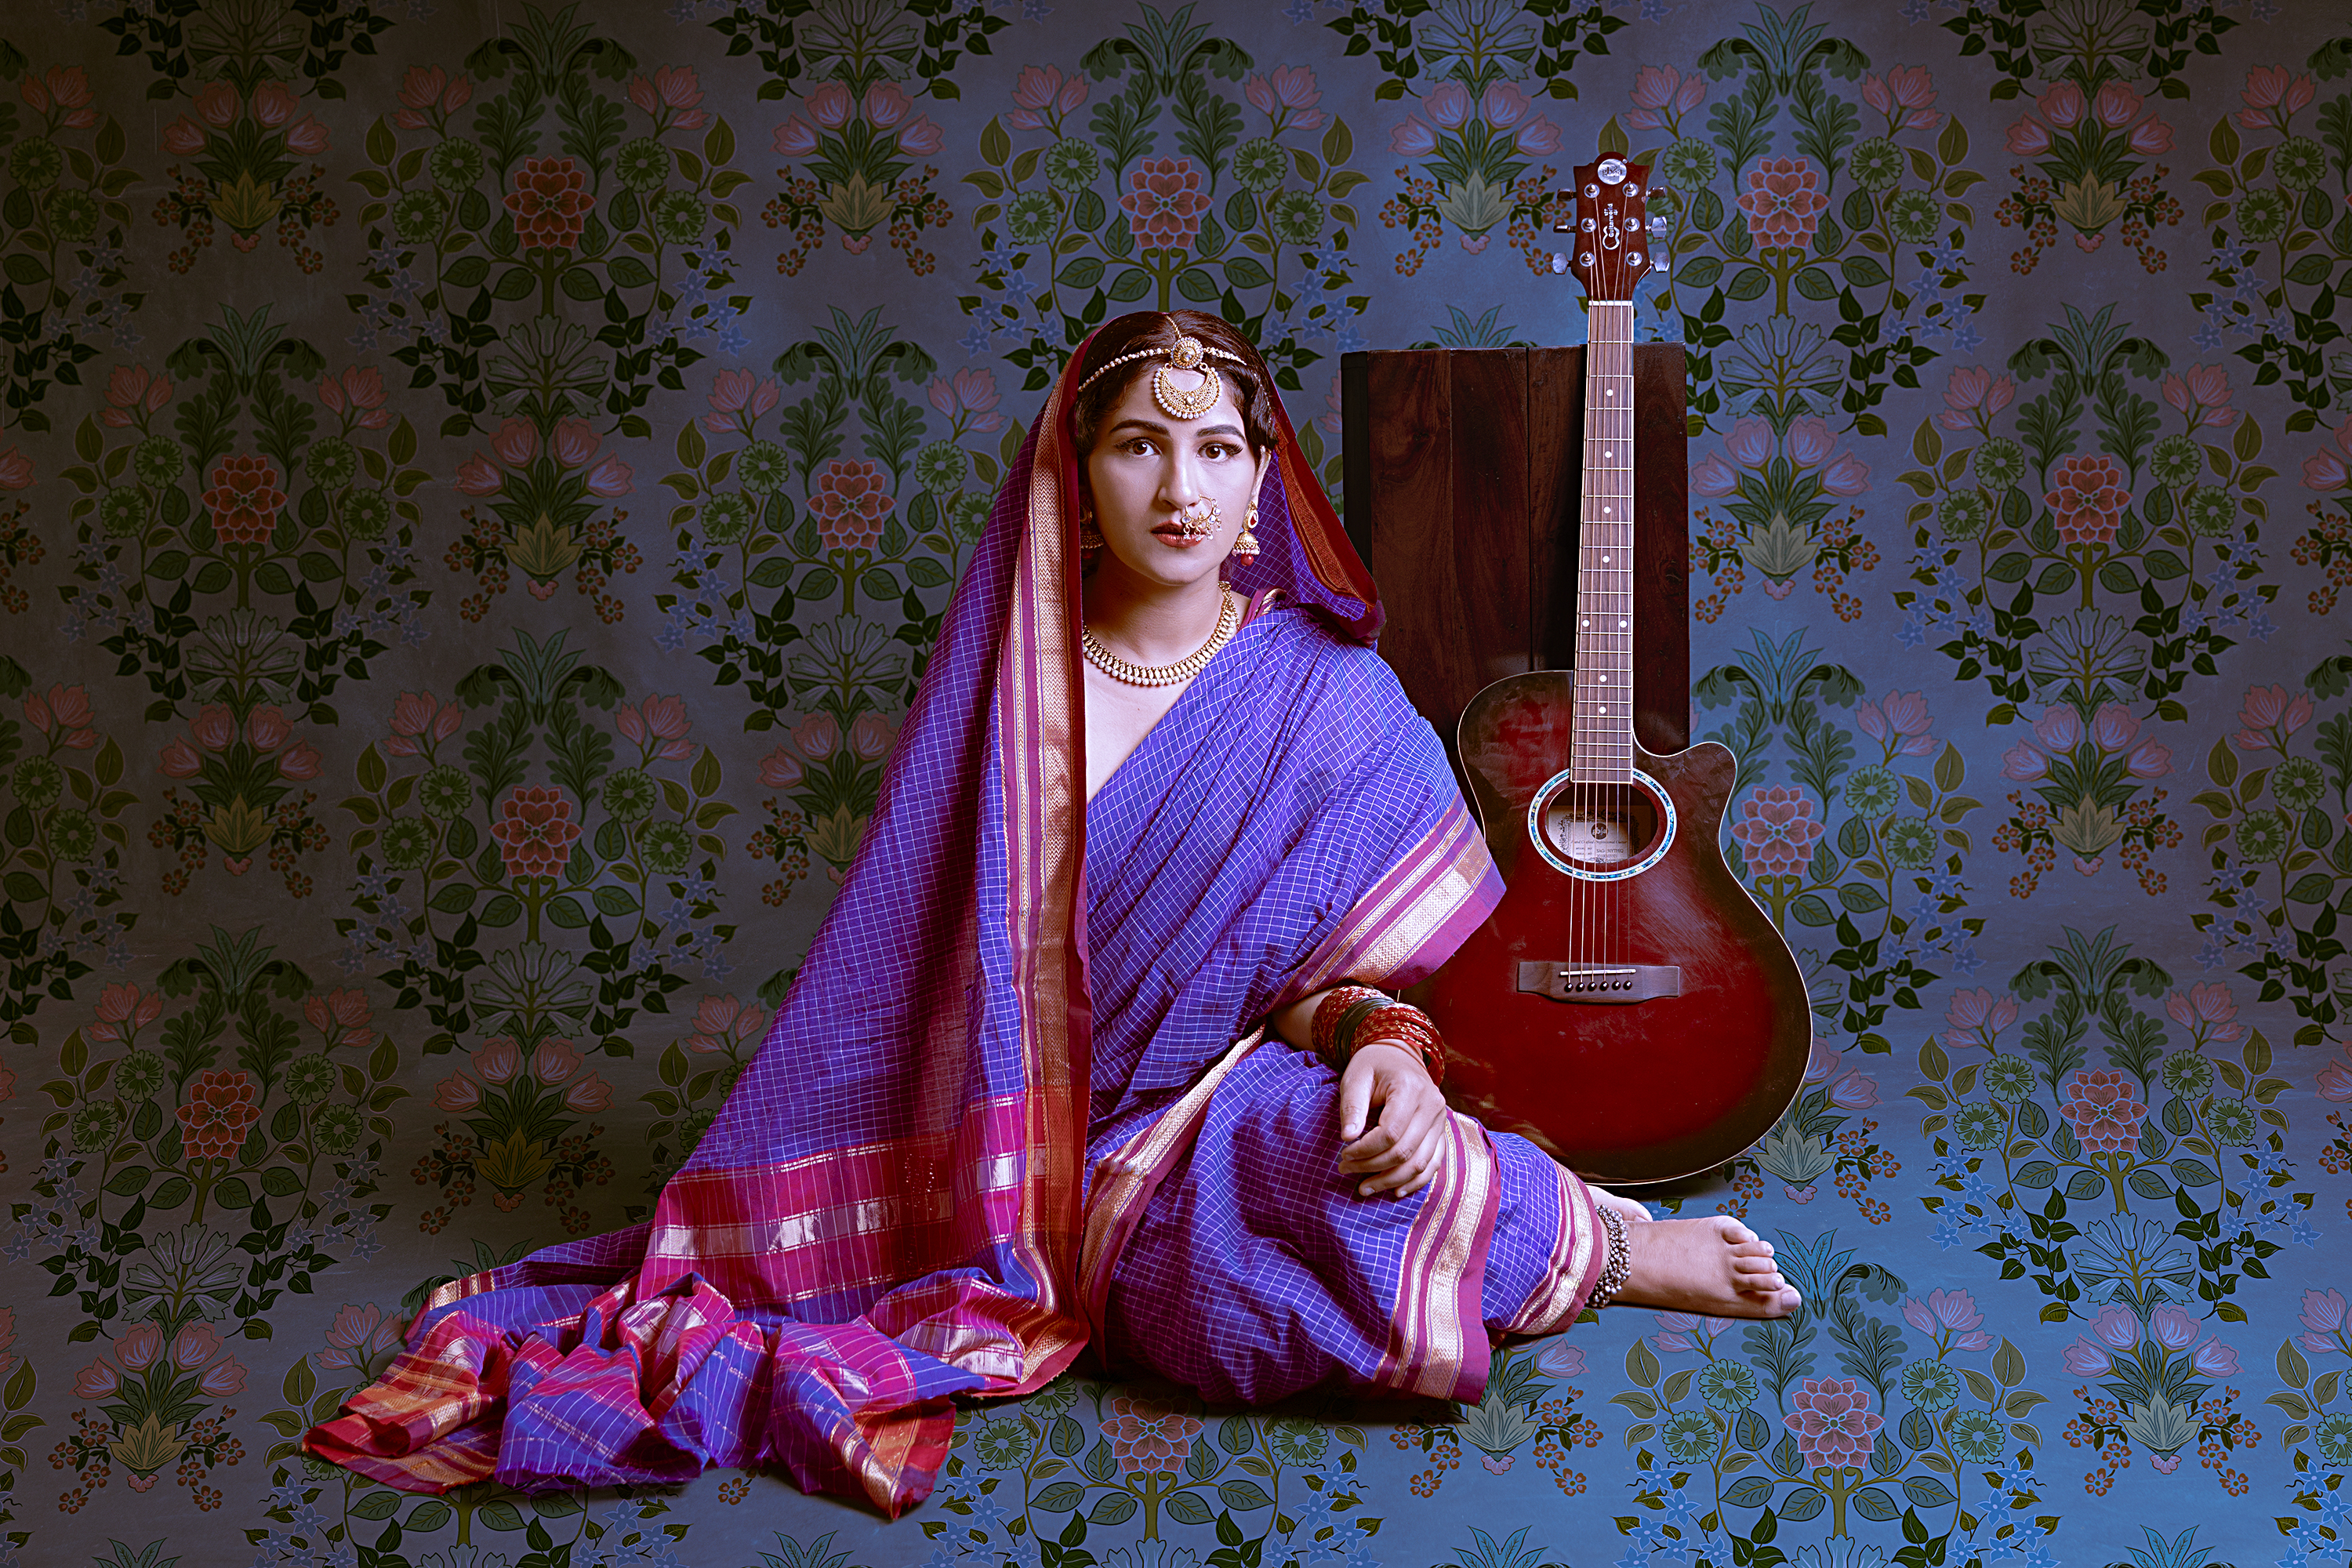 Daisy Naidu Takes Unique Portraits in Homage to Legendary Artists